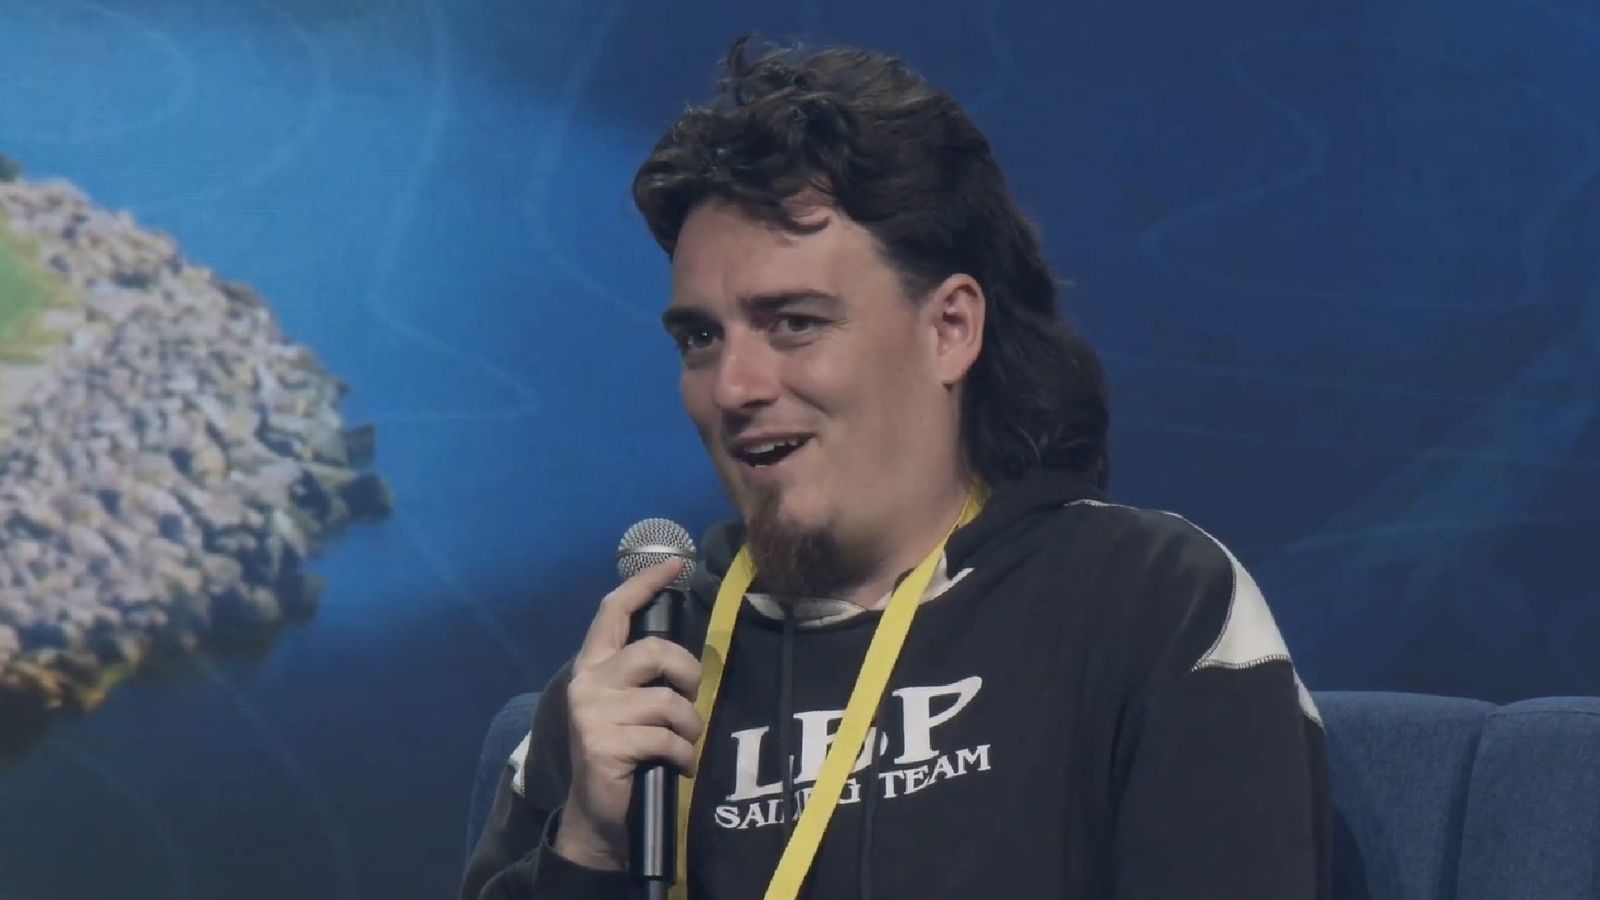 Palmer Luckey, founder of Oculus, holding a microphone and speaking on-stage